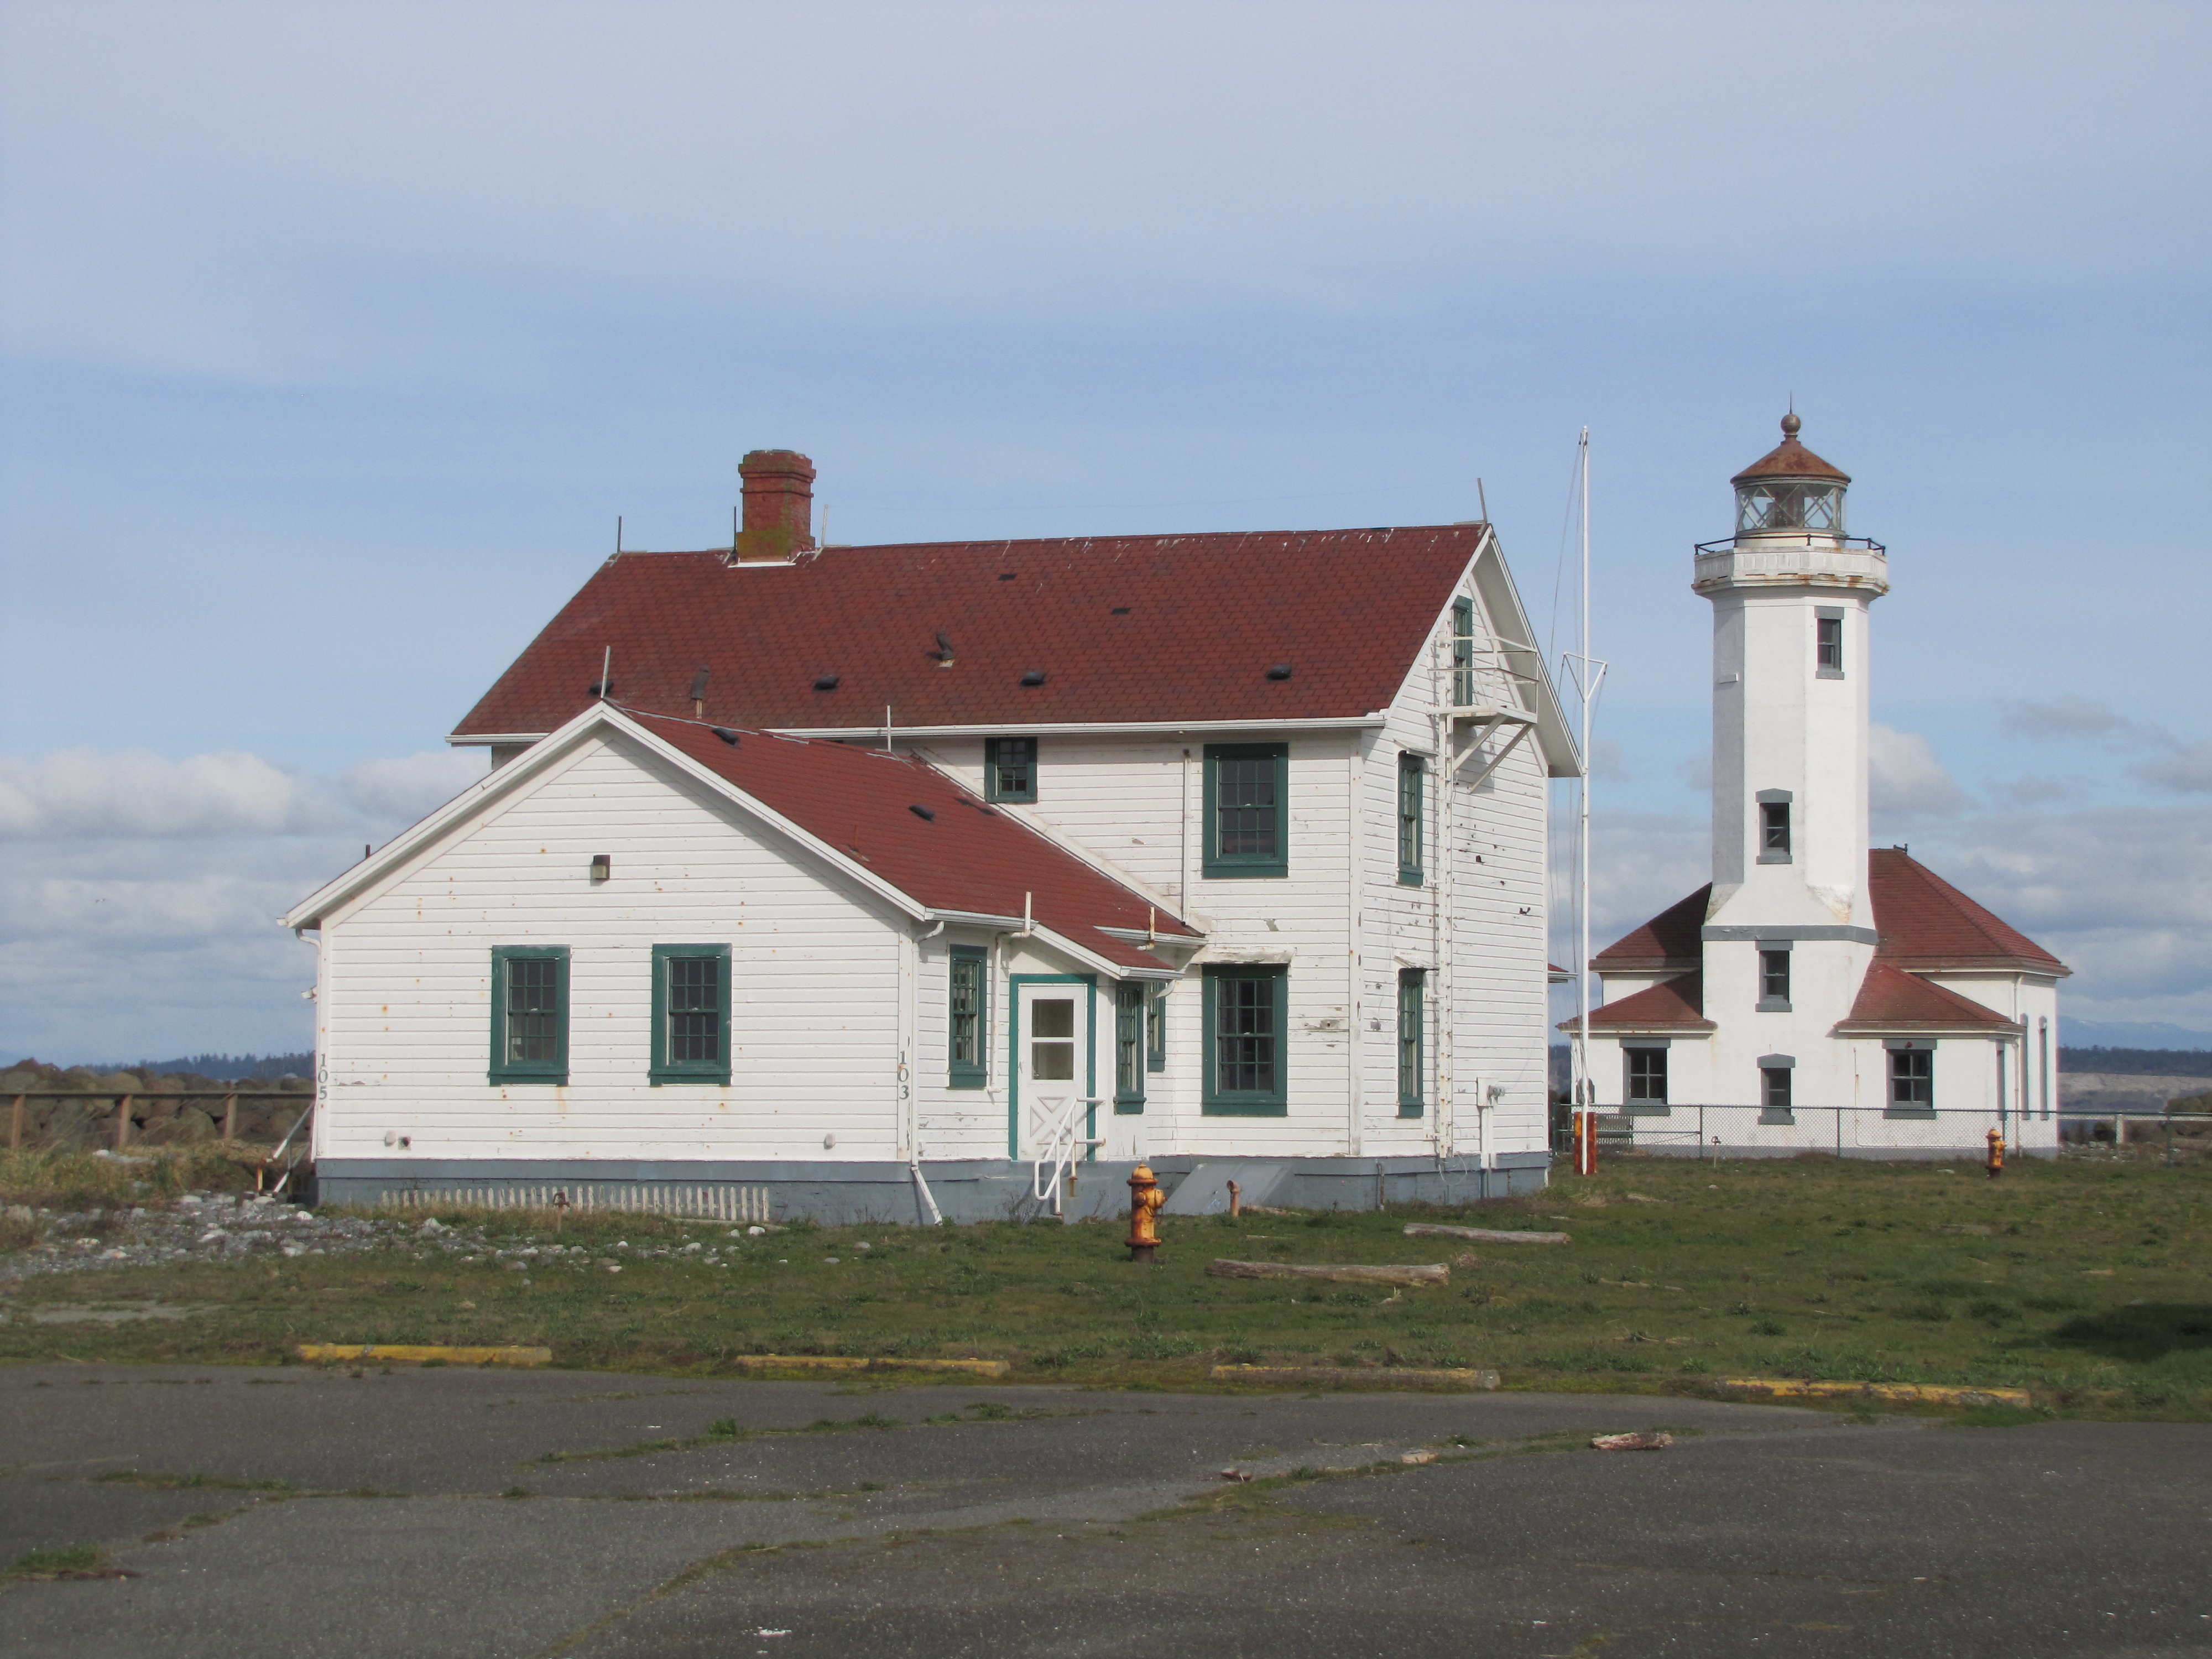 The U.S. Coast Guard is seeking bids for the operation and maintenance of the Point Wilson Lighthouse at Fort Worden. The lighthouse and associated buildings would be be leased to an organization that can maintain the property in a historical context. (Arwyn Rice/Peninsula Daily News)